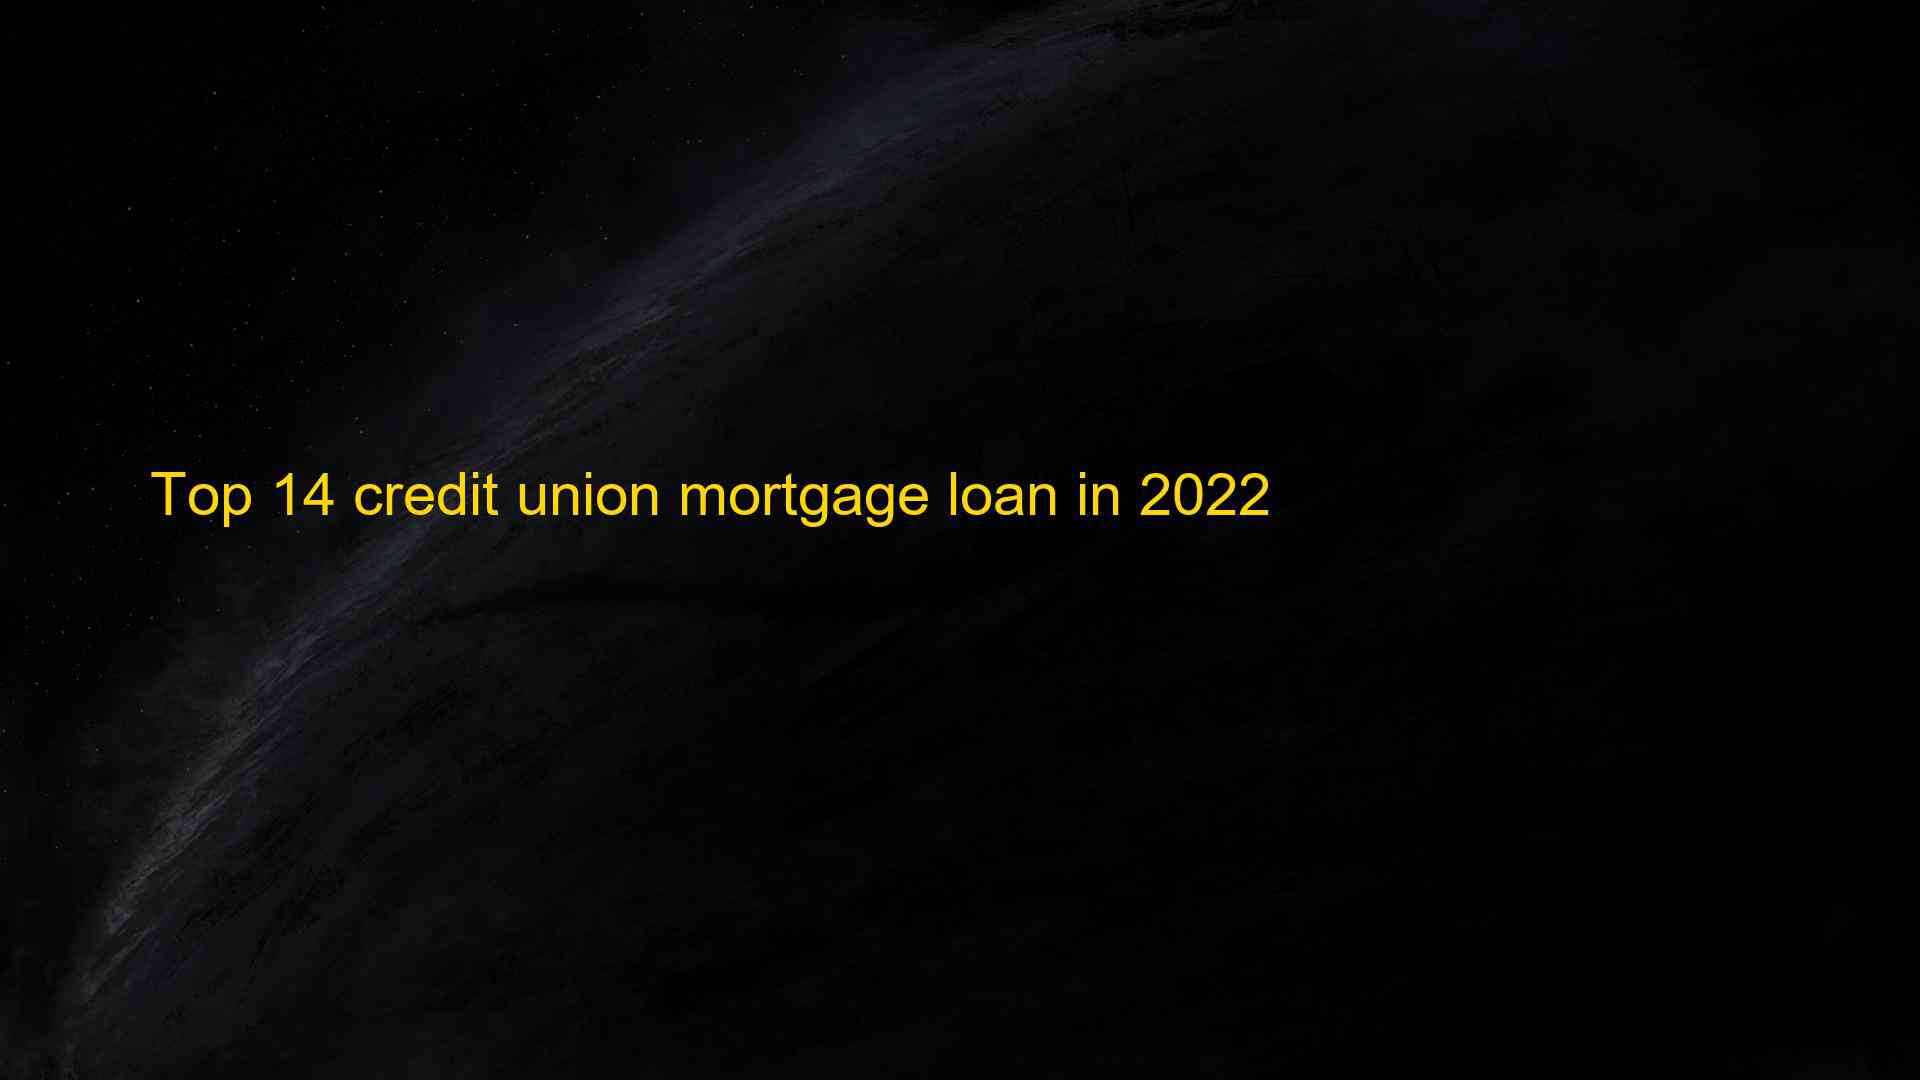 Top 14 credit union mortgage loan in 2022 1660256043